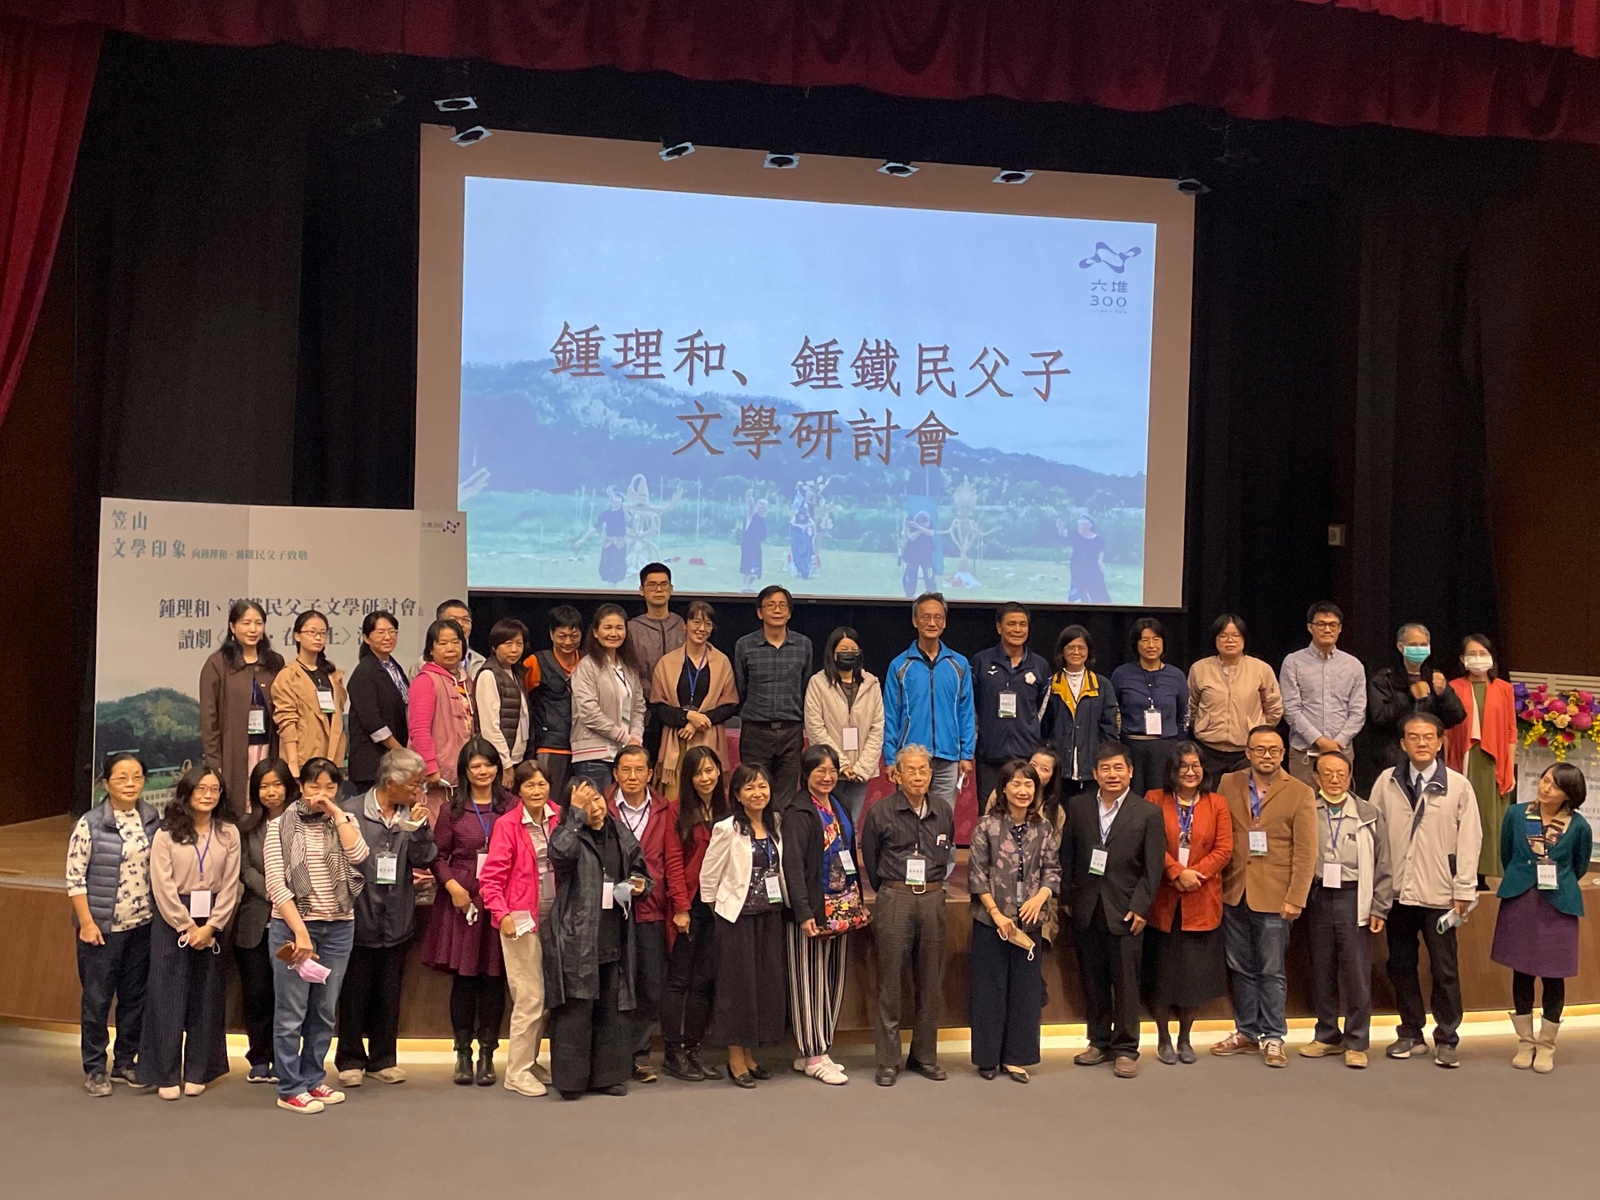 Impressions of 300 Years of Literature from Liudui: A Literary Conference in Tribute to Chung Li-Ho and His Son Chung Tie-Min